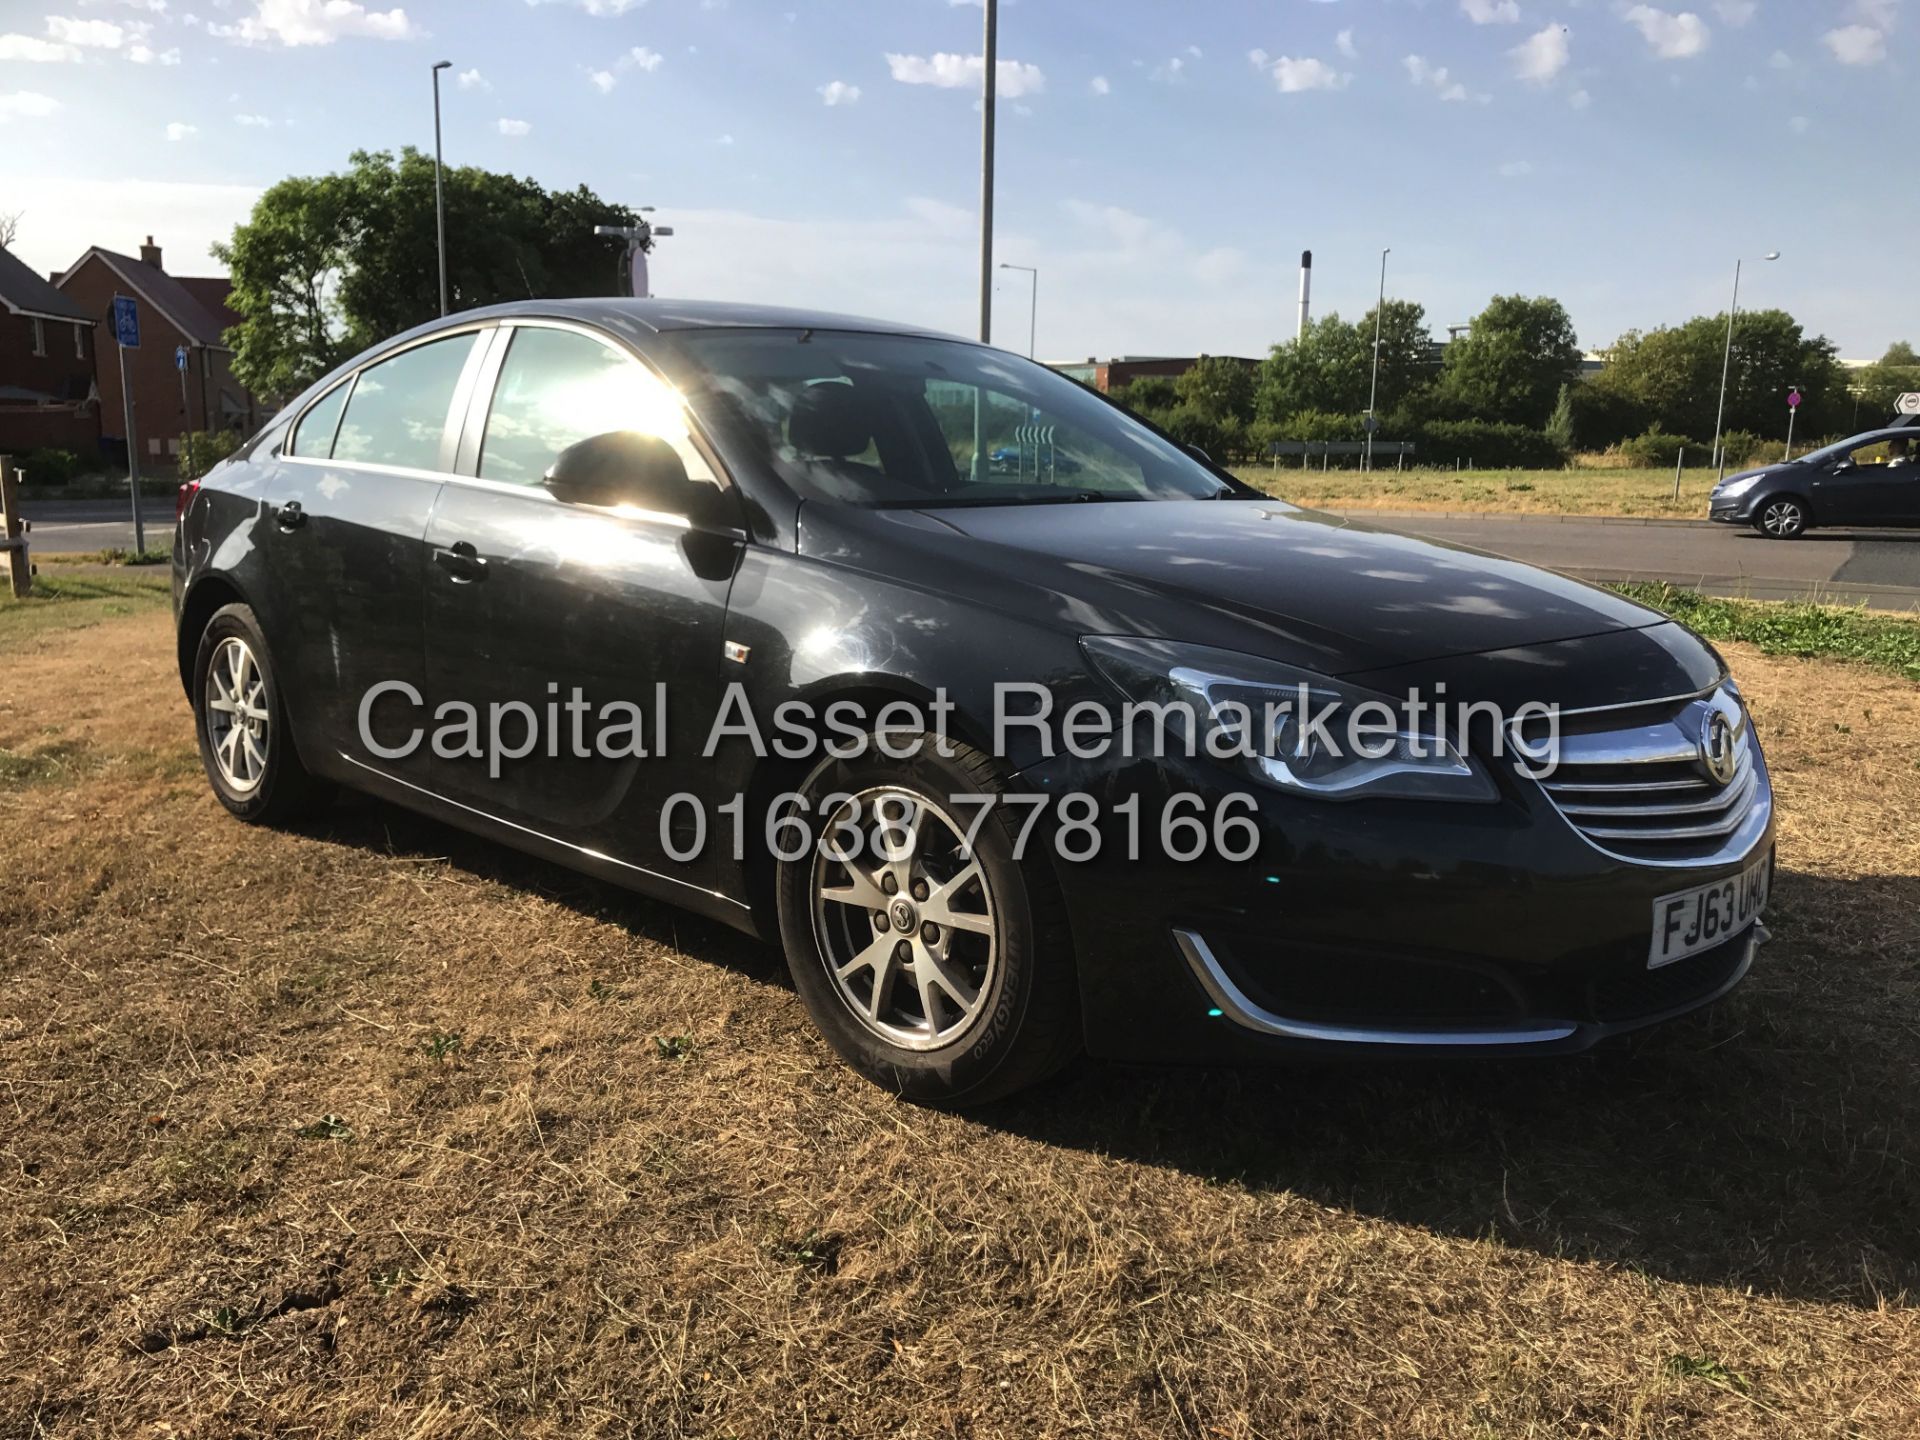 On Sale VAUXHALL INSIGNIA 2.0CDTI "DESIGN" 6 SPEED (2014 MODEL-NEW SHAPE) AIR CON -ELEC PACK -CRUISE - Image 9 of 22